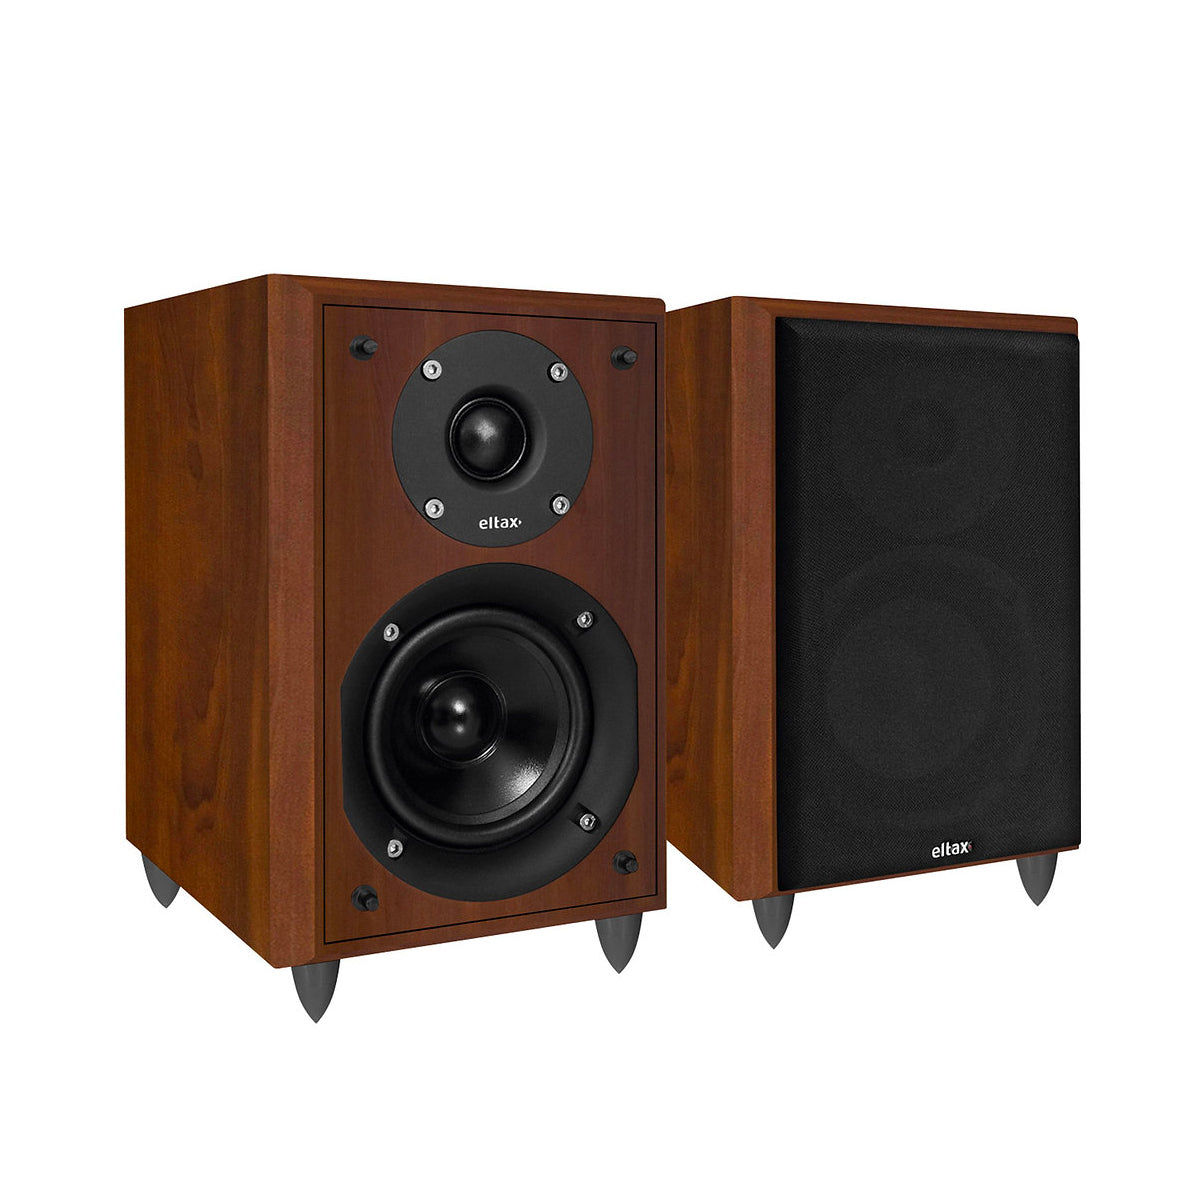 Eltax Monitor 1 2-Way Speakers - Calvados - The Audio Experts